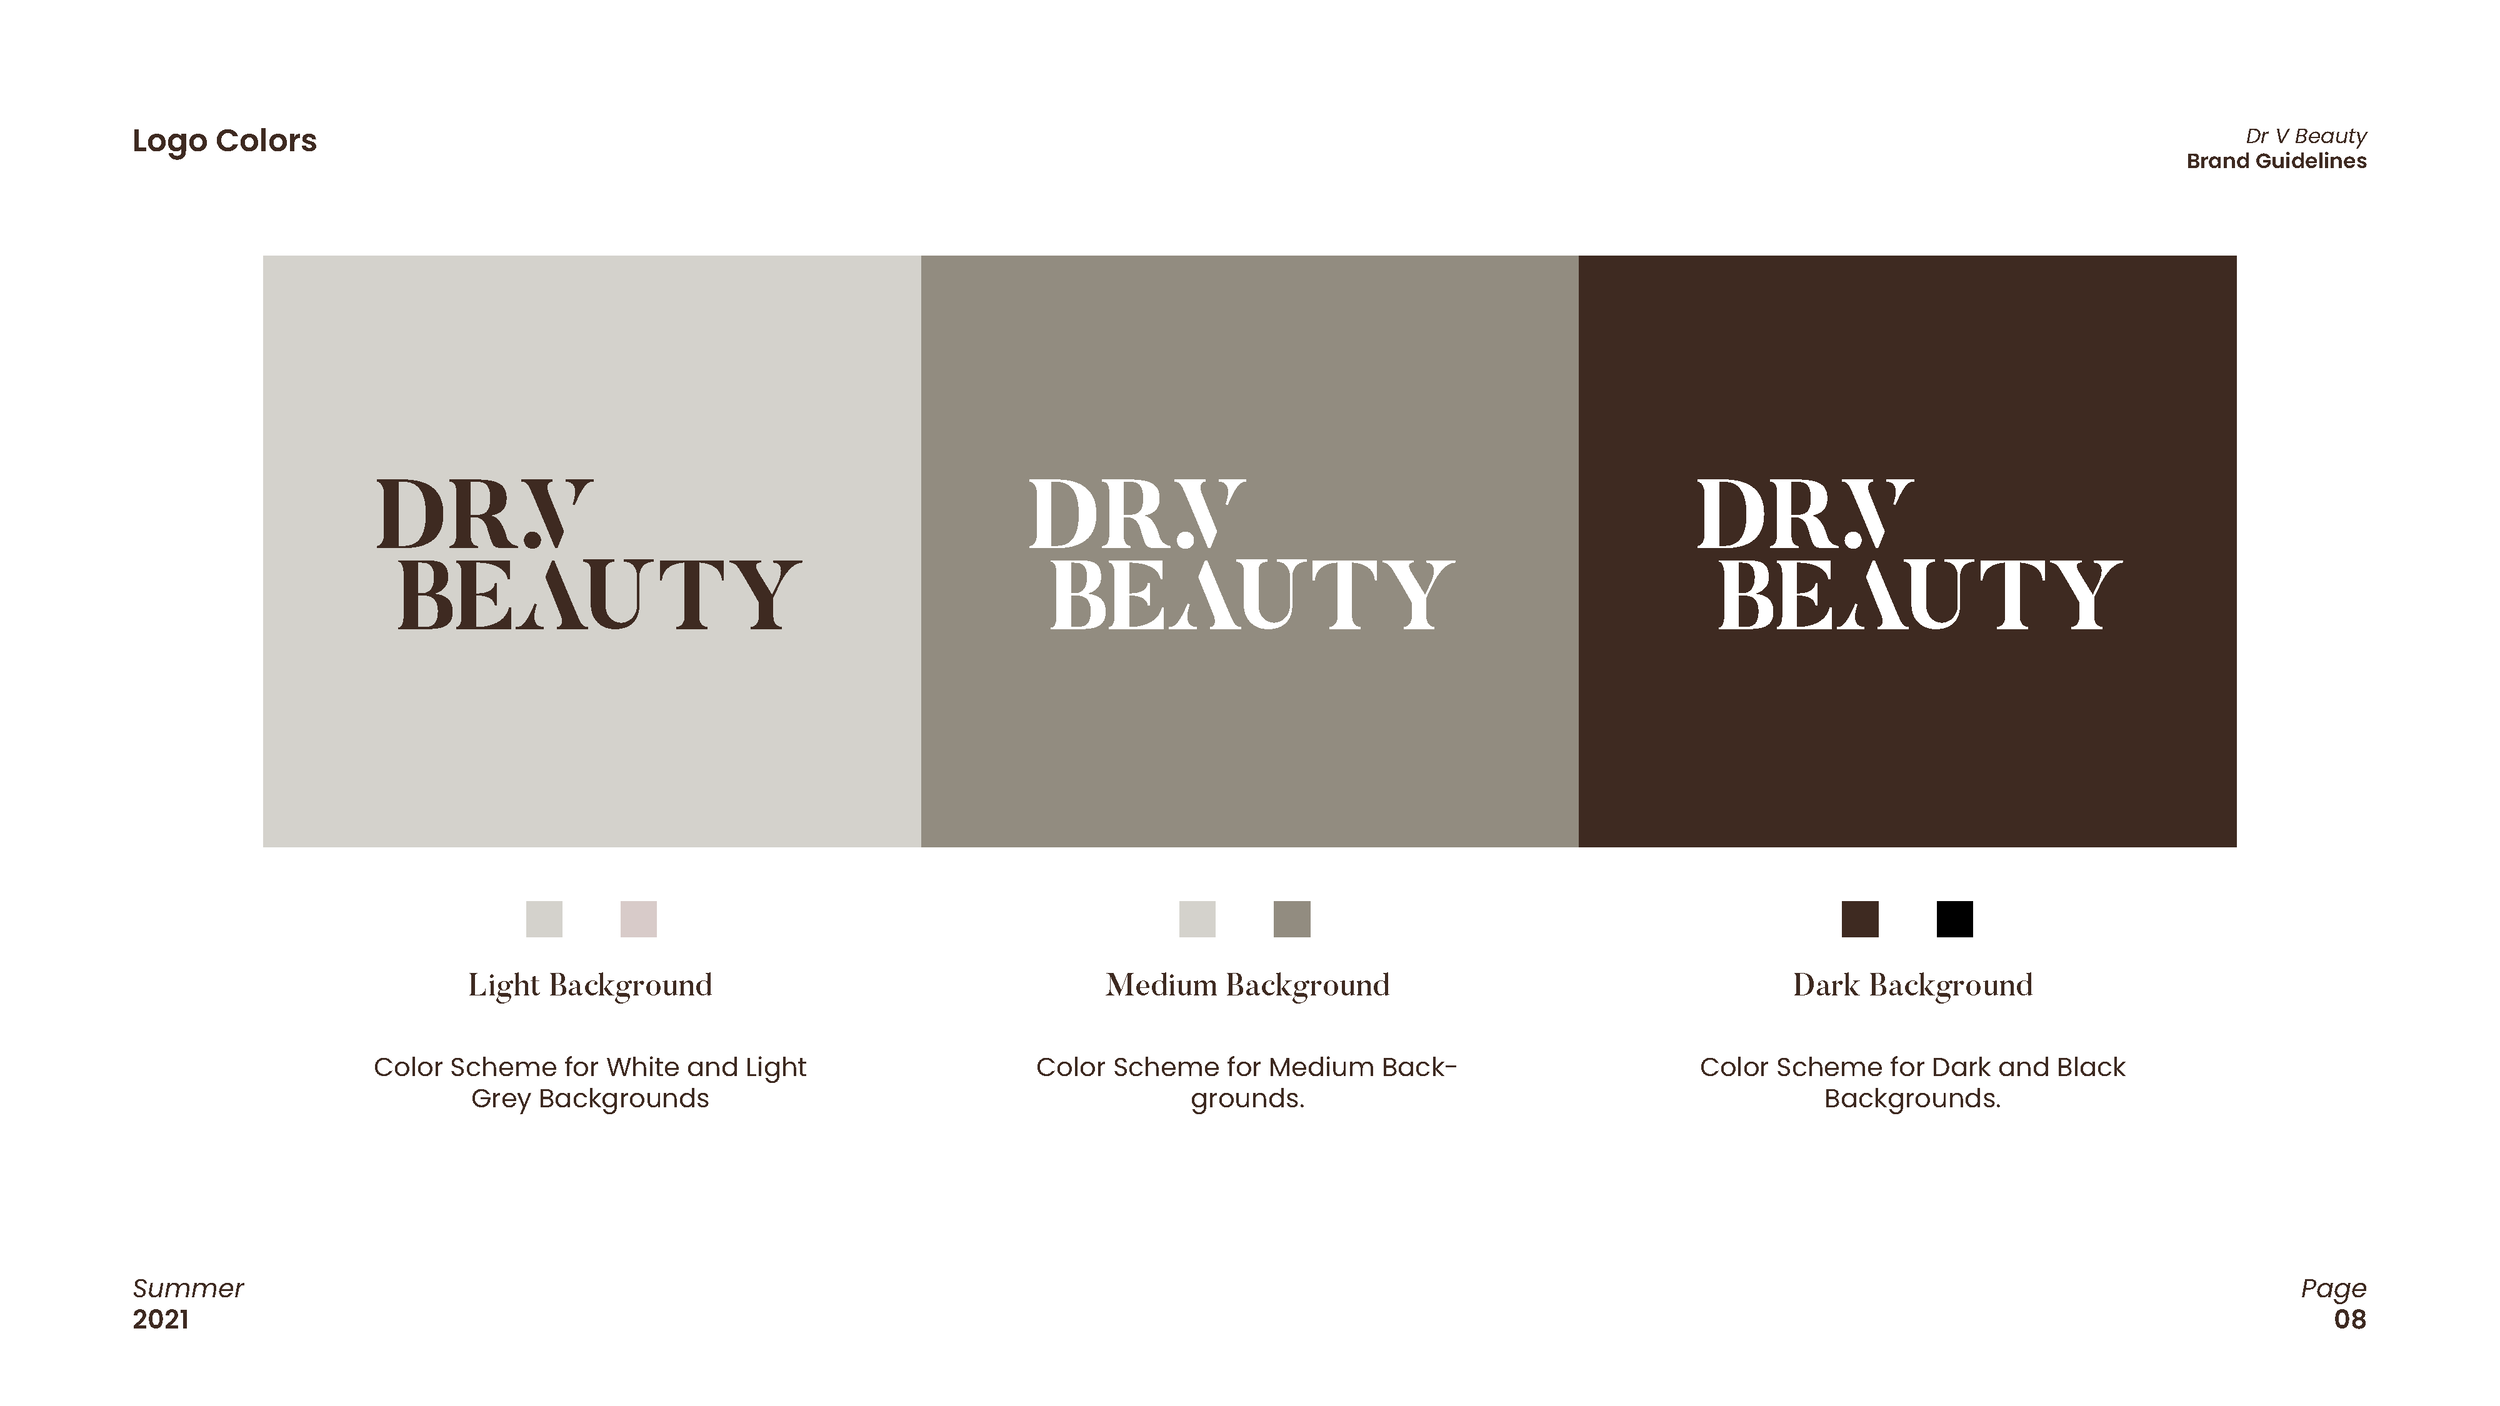 Dr V Beauty - Brand Guidelines_Page_08.png